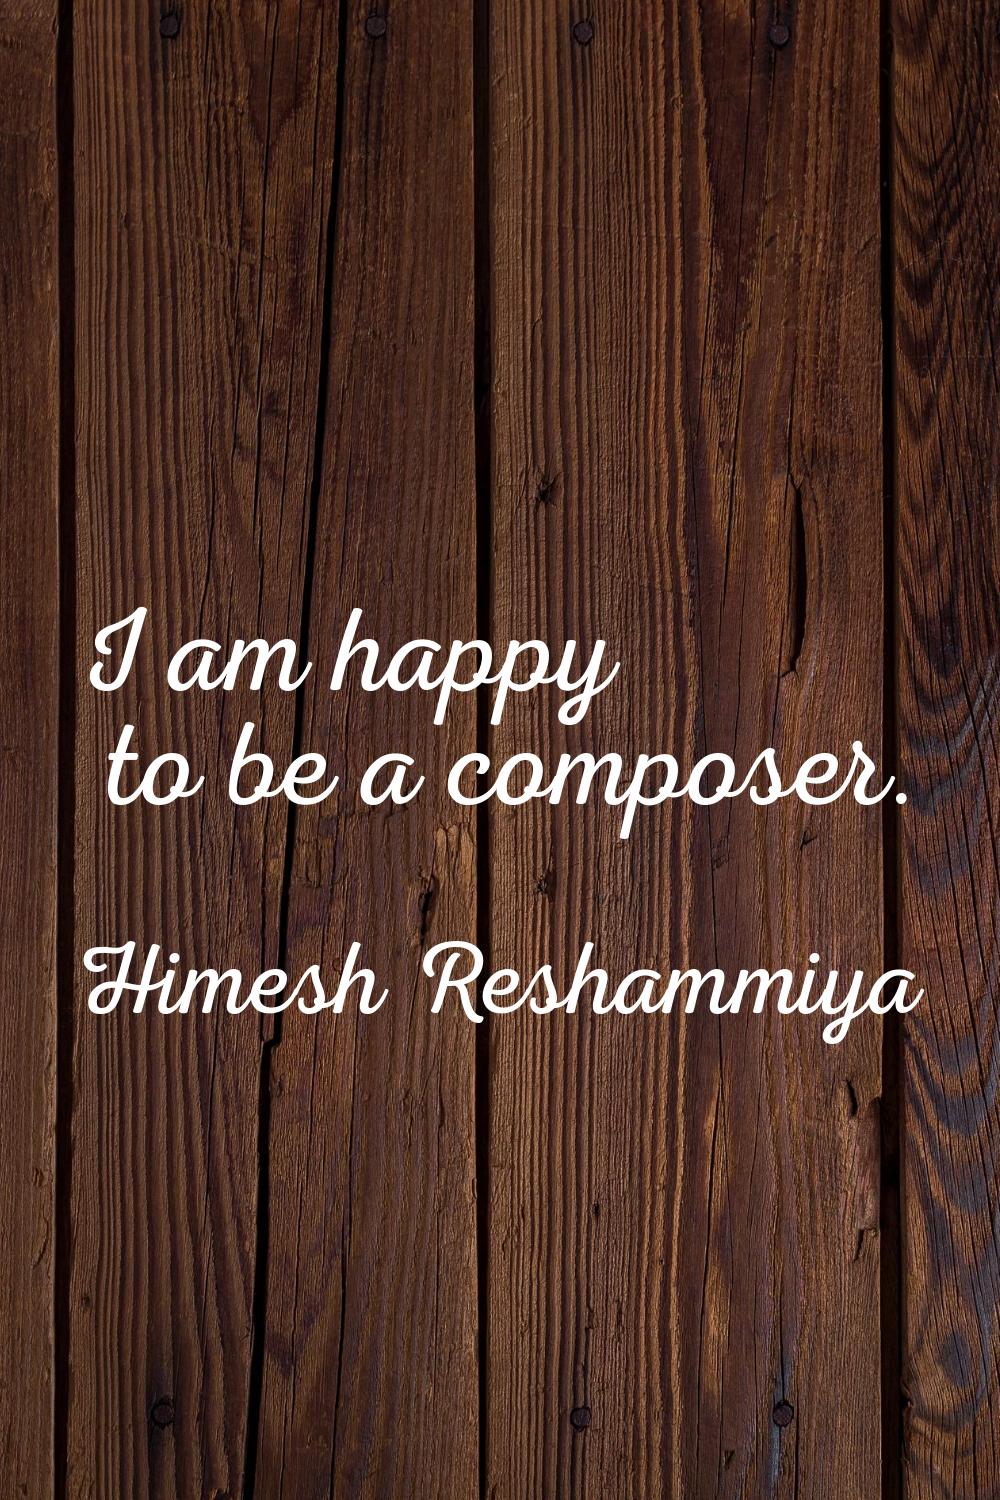 I am happy to be a composer.